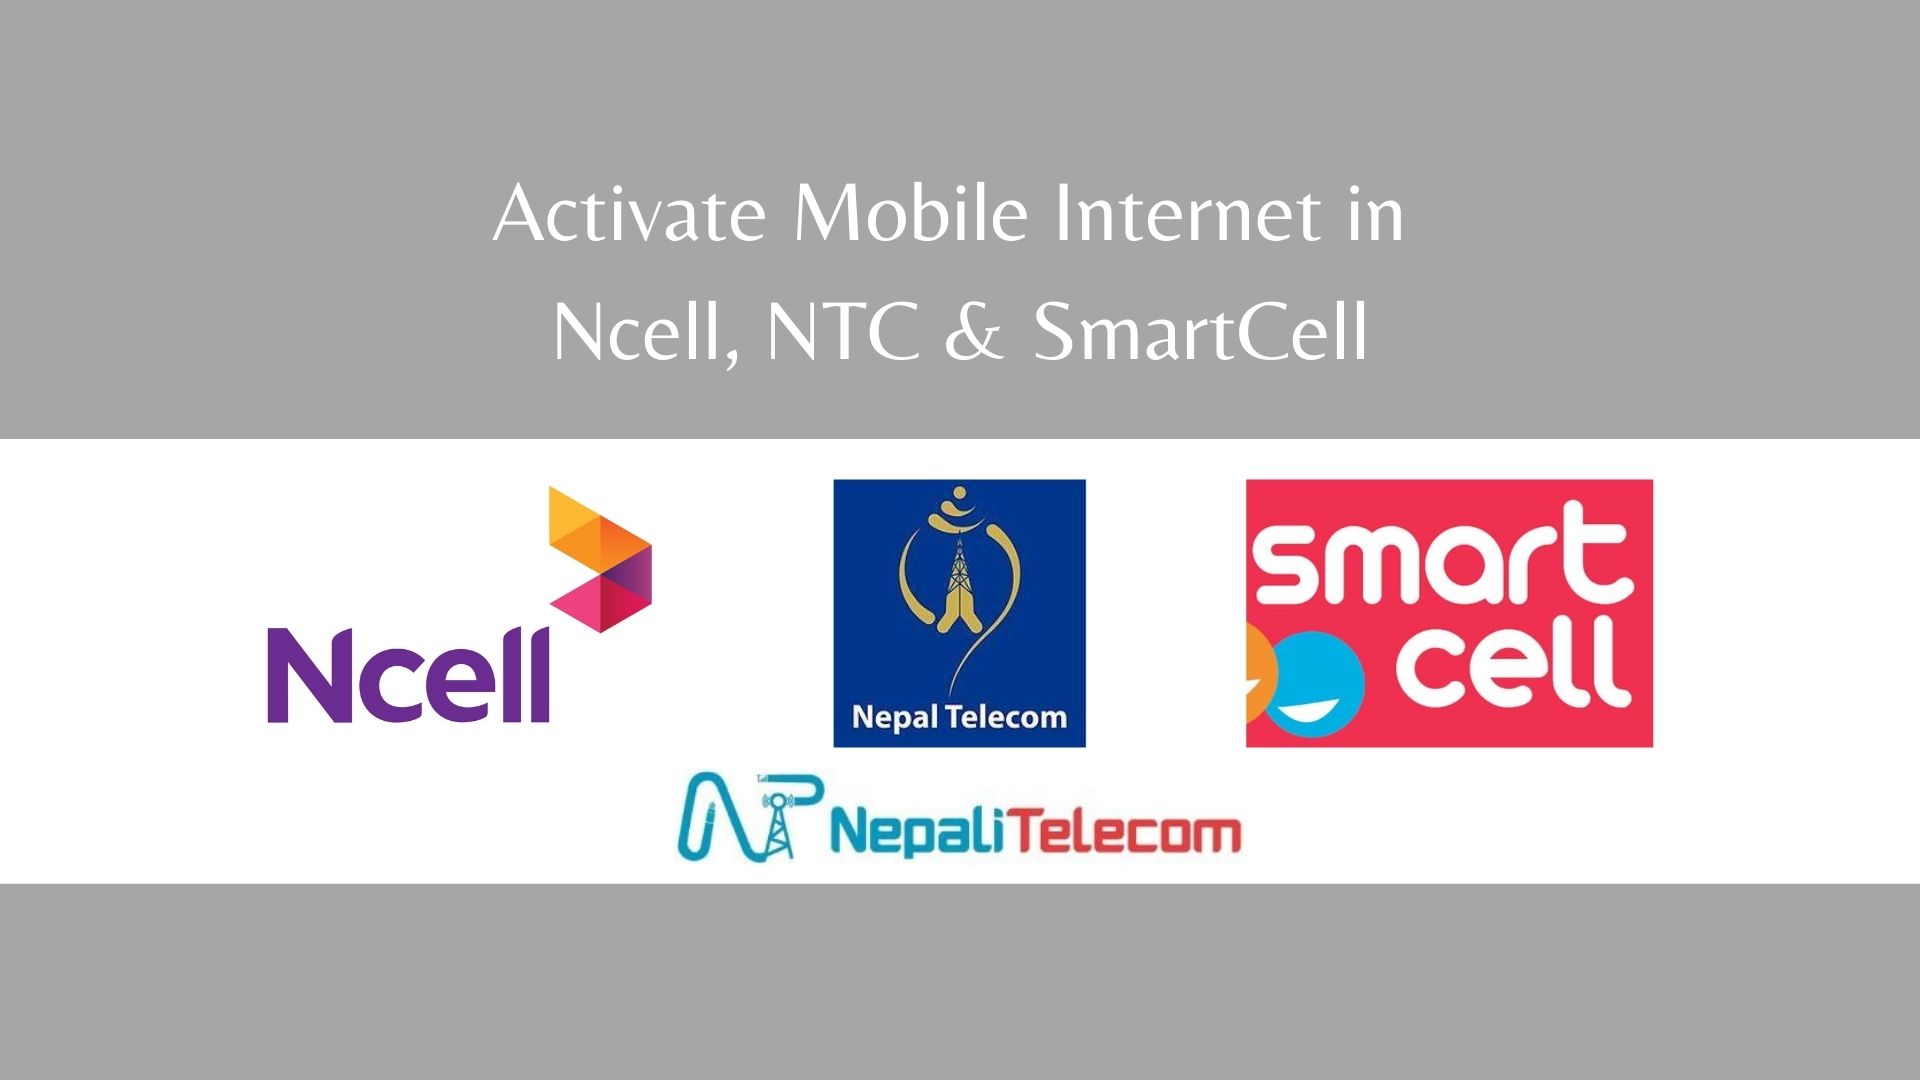 How To Activate Mobile Internet in Ncell, NTC & Smart Cell